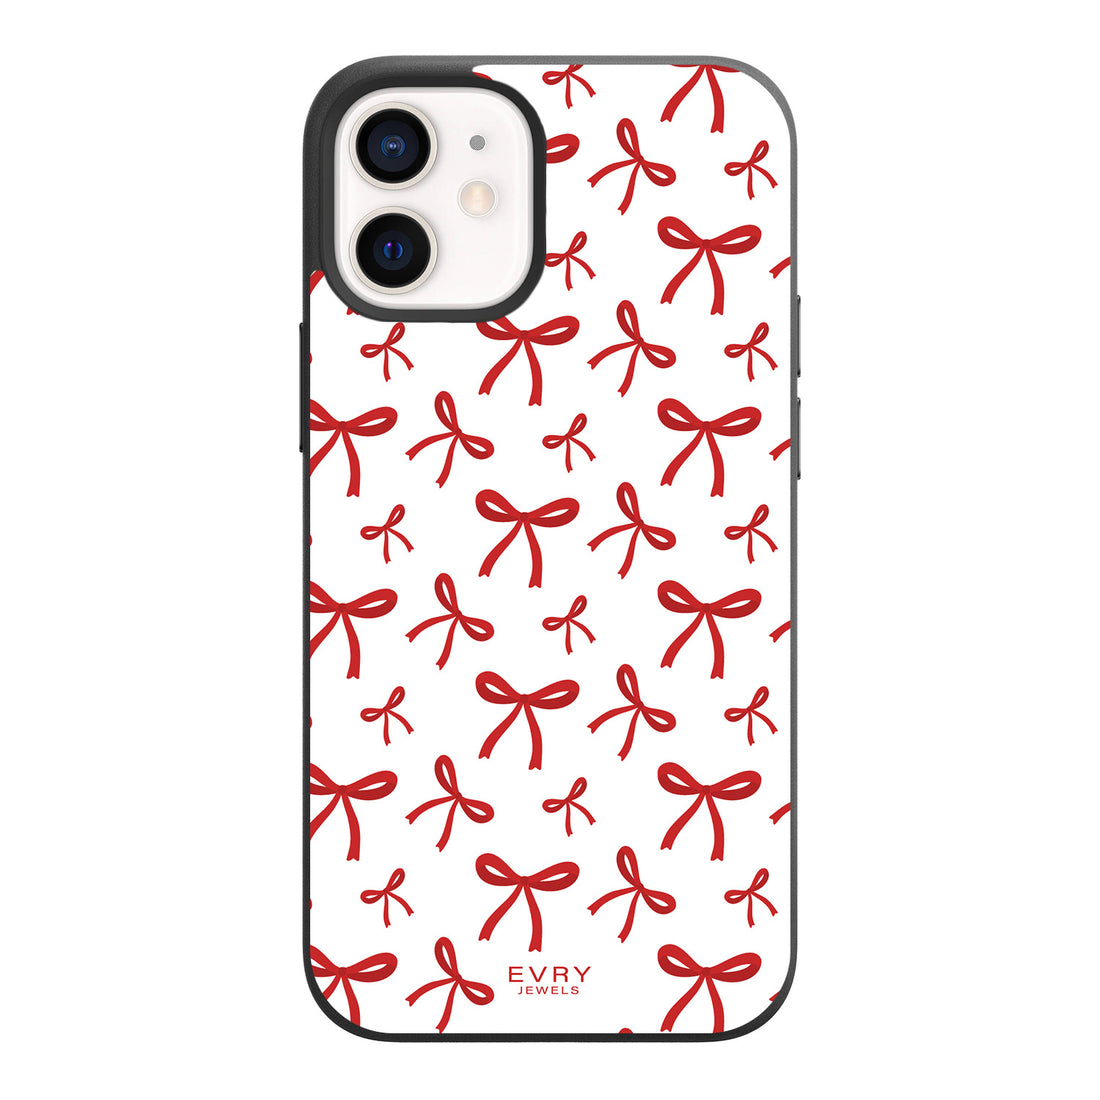 Put a Bow on it Phone Case